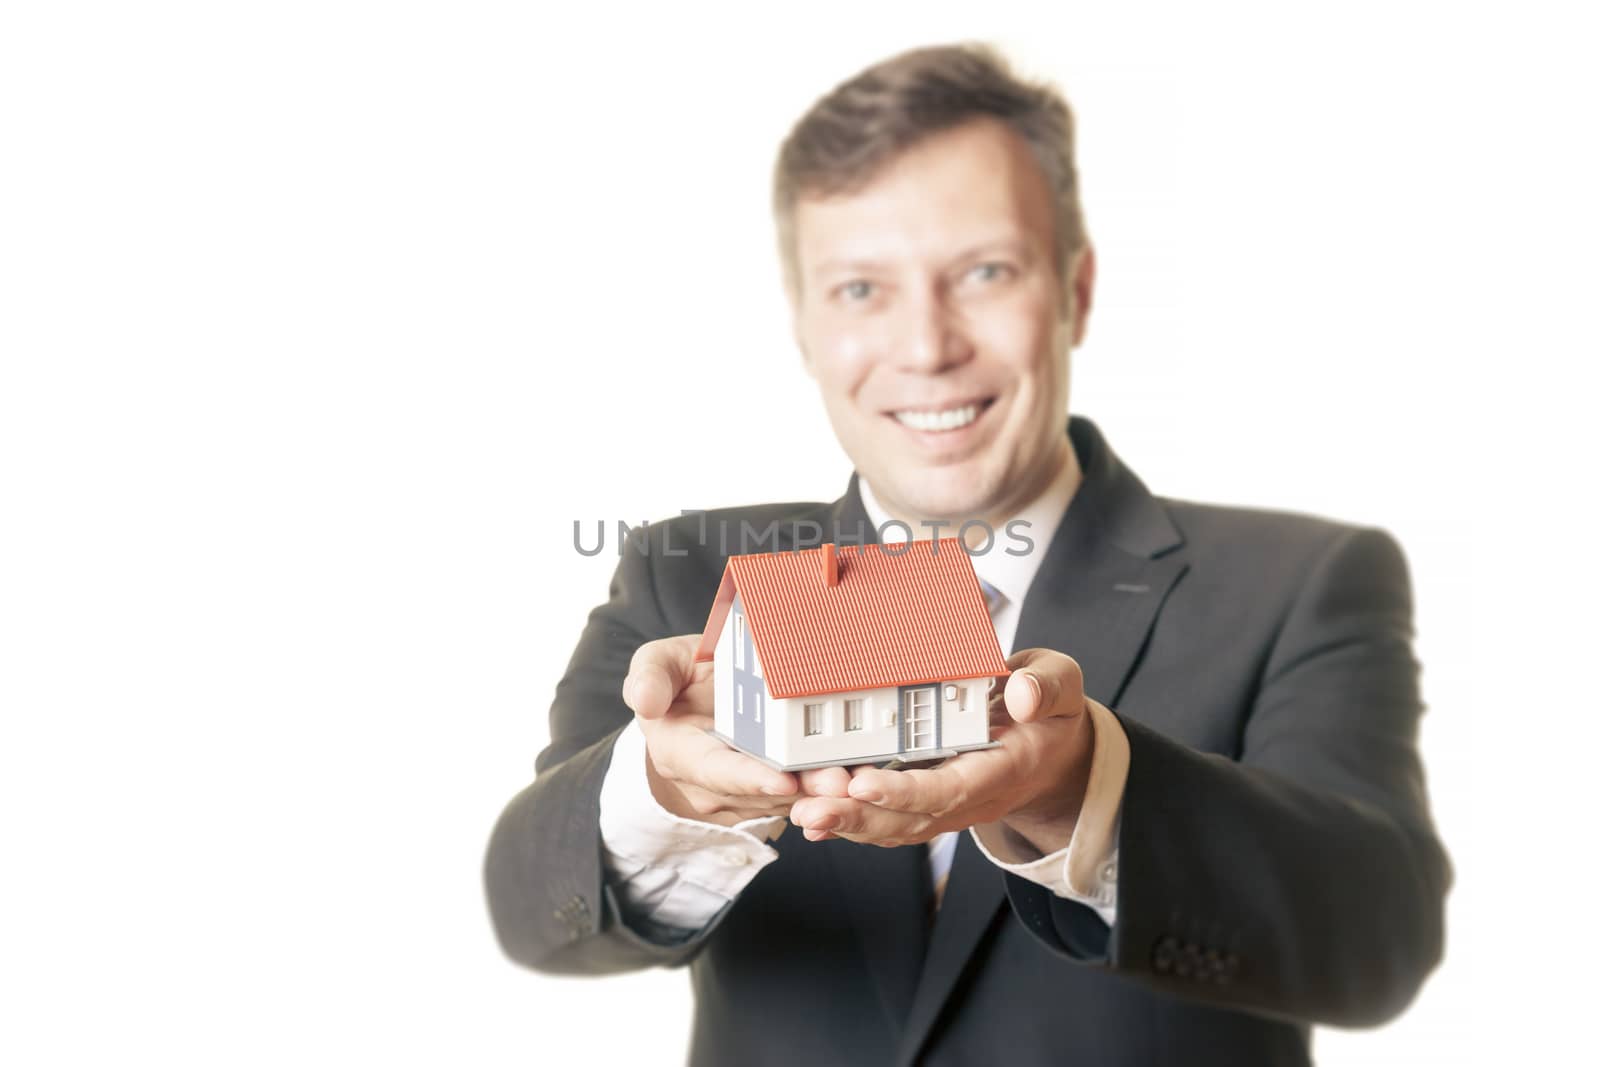 An image of a man holding a house in his hands